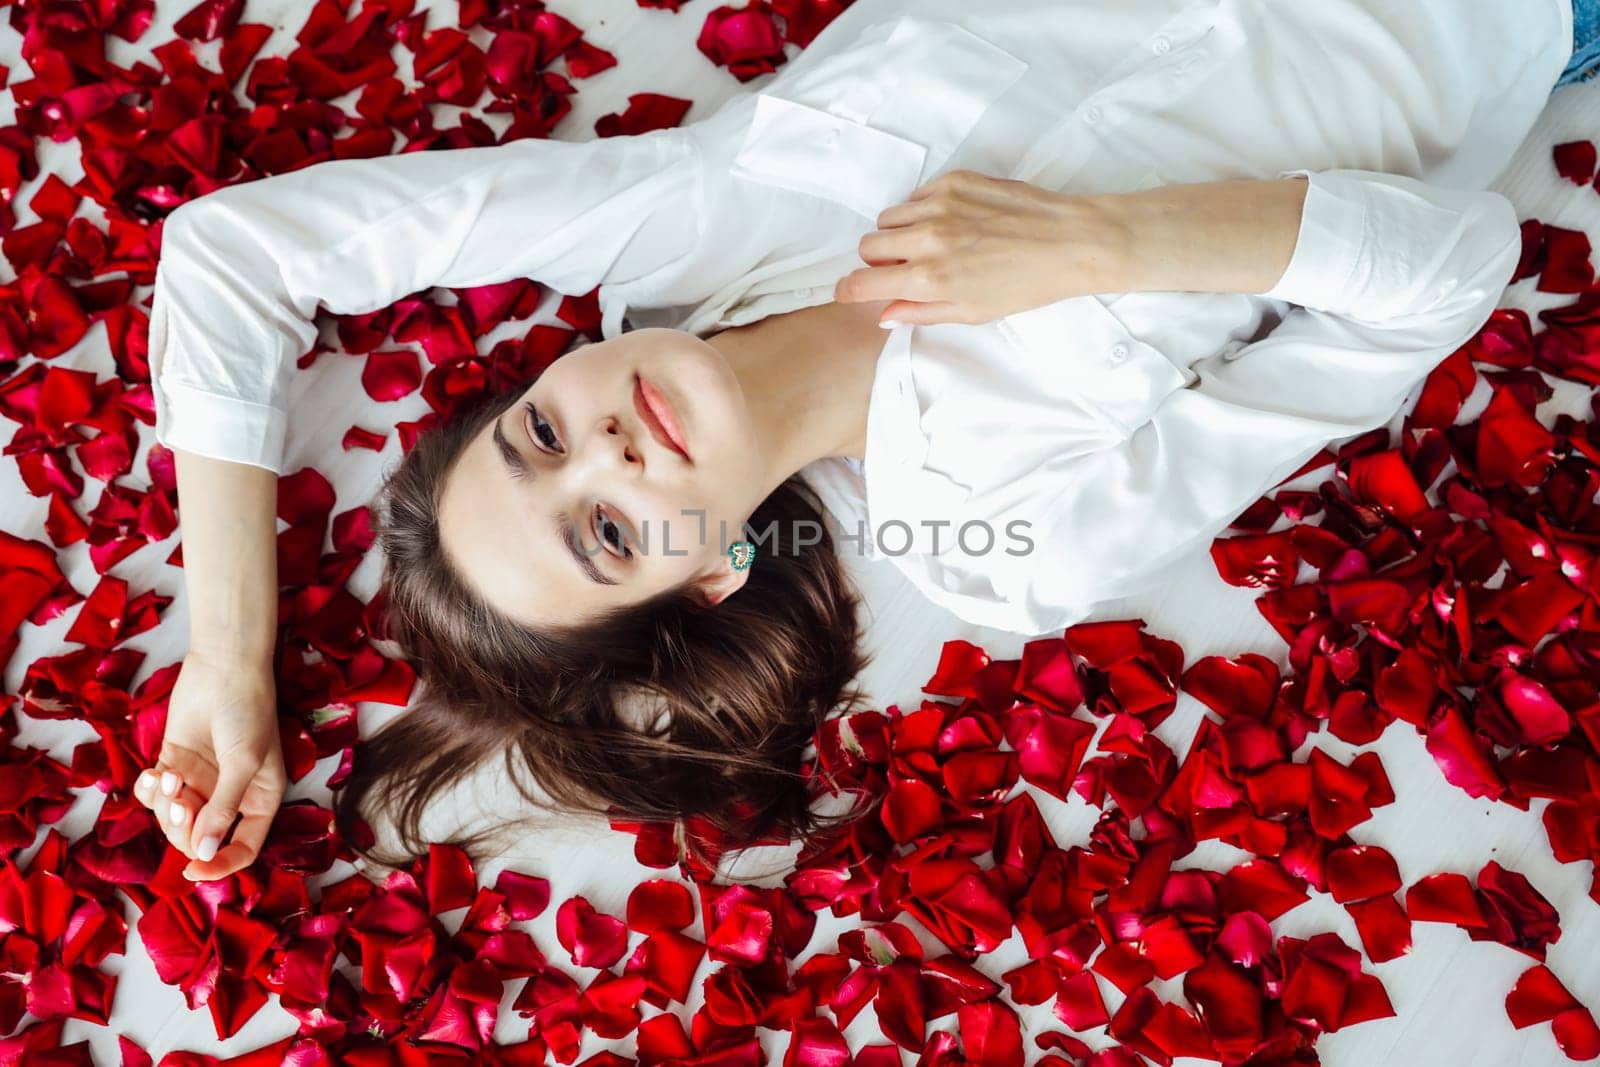 woman lies on the floor in red rose petals